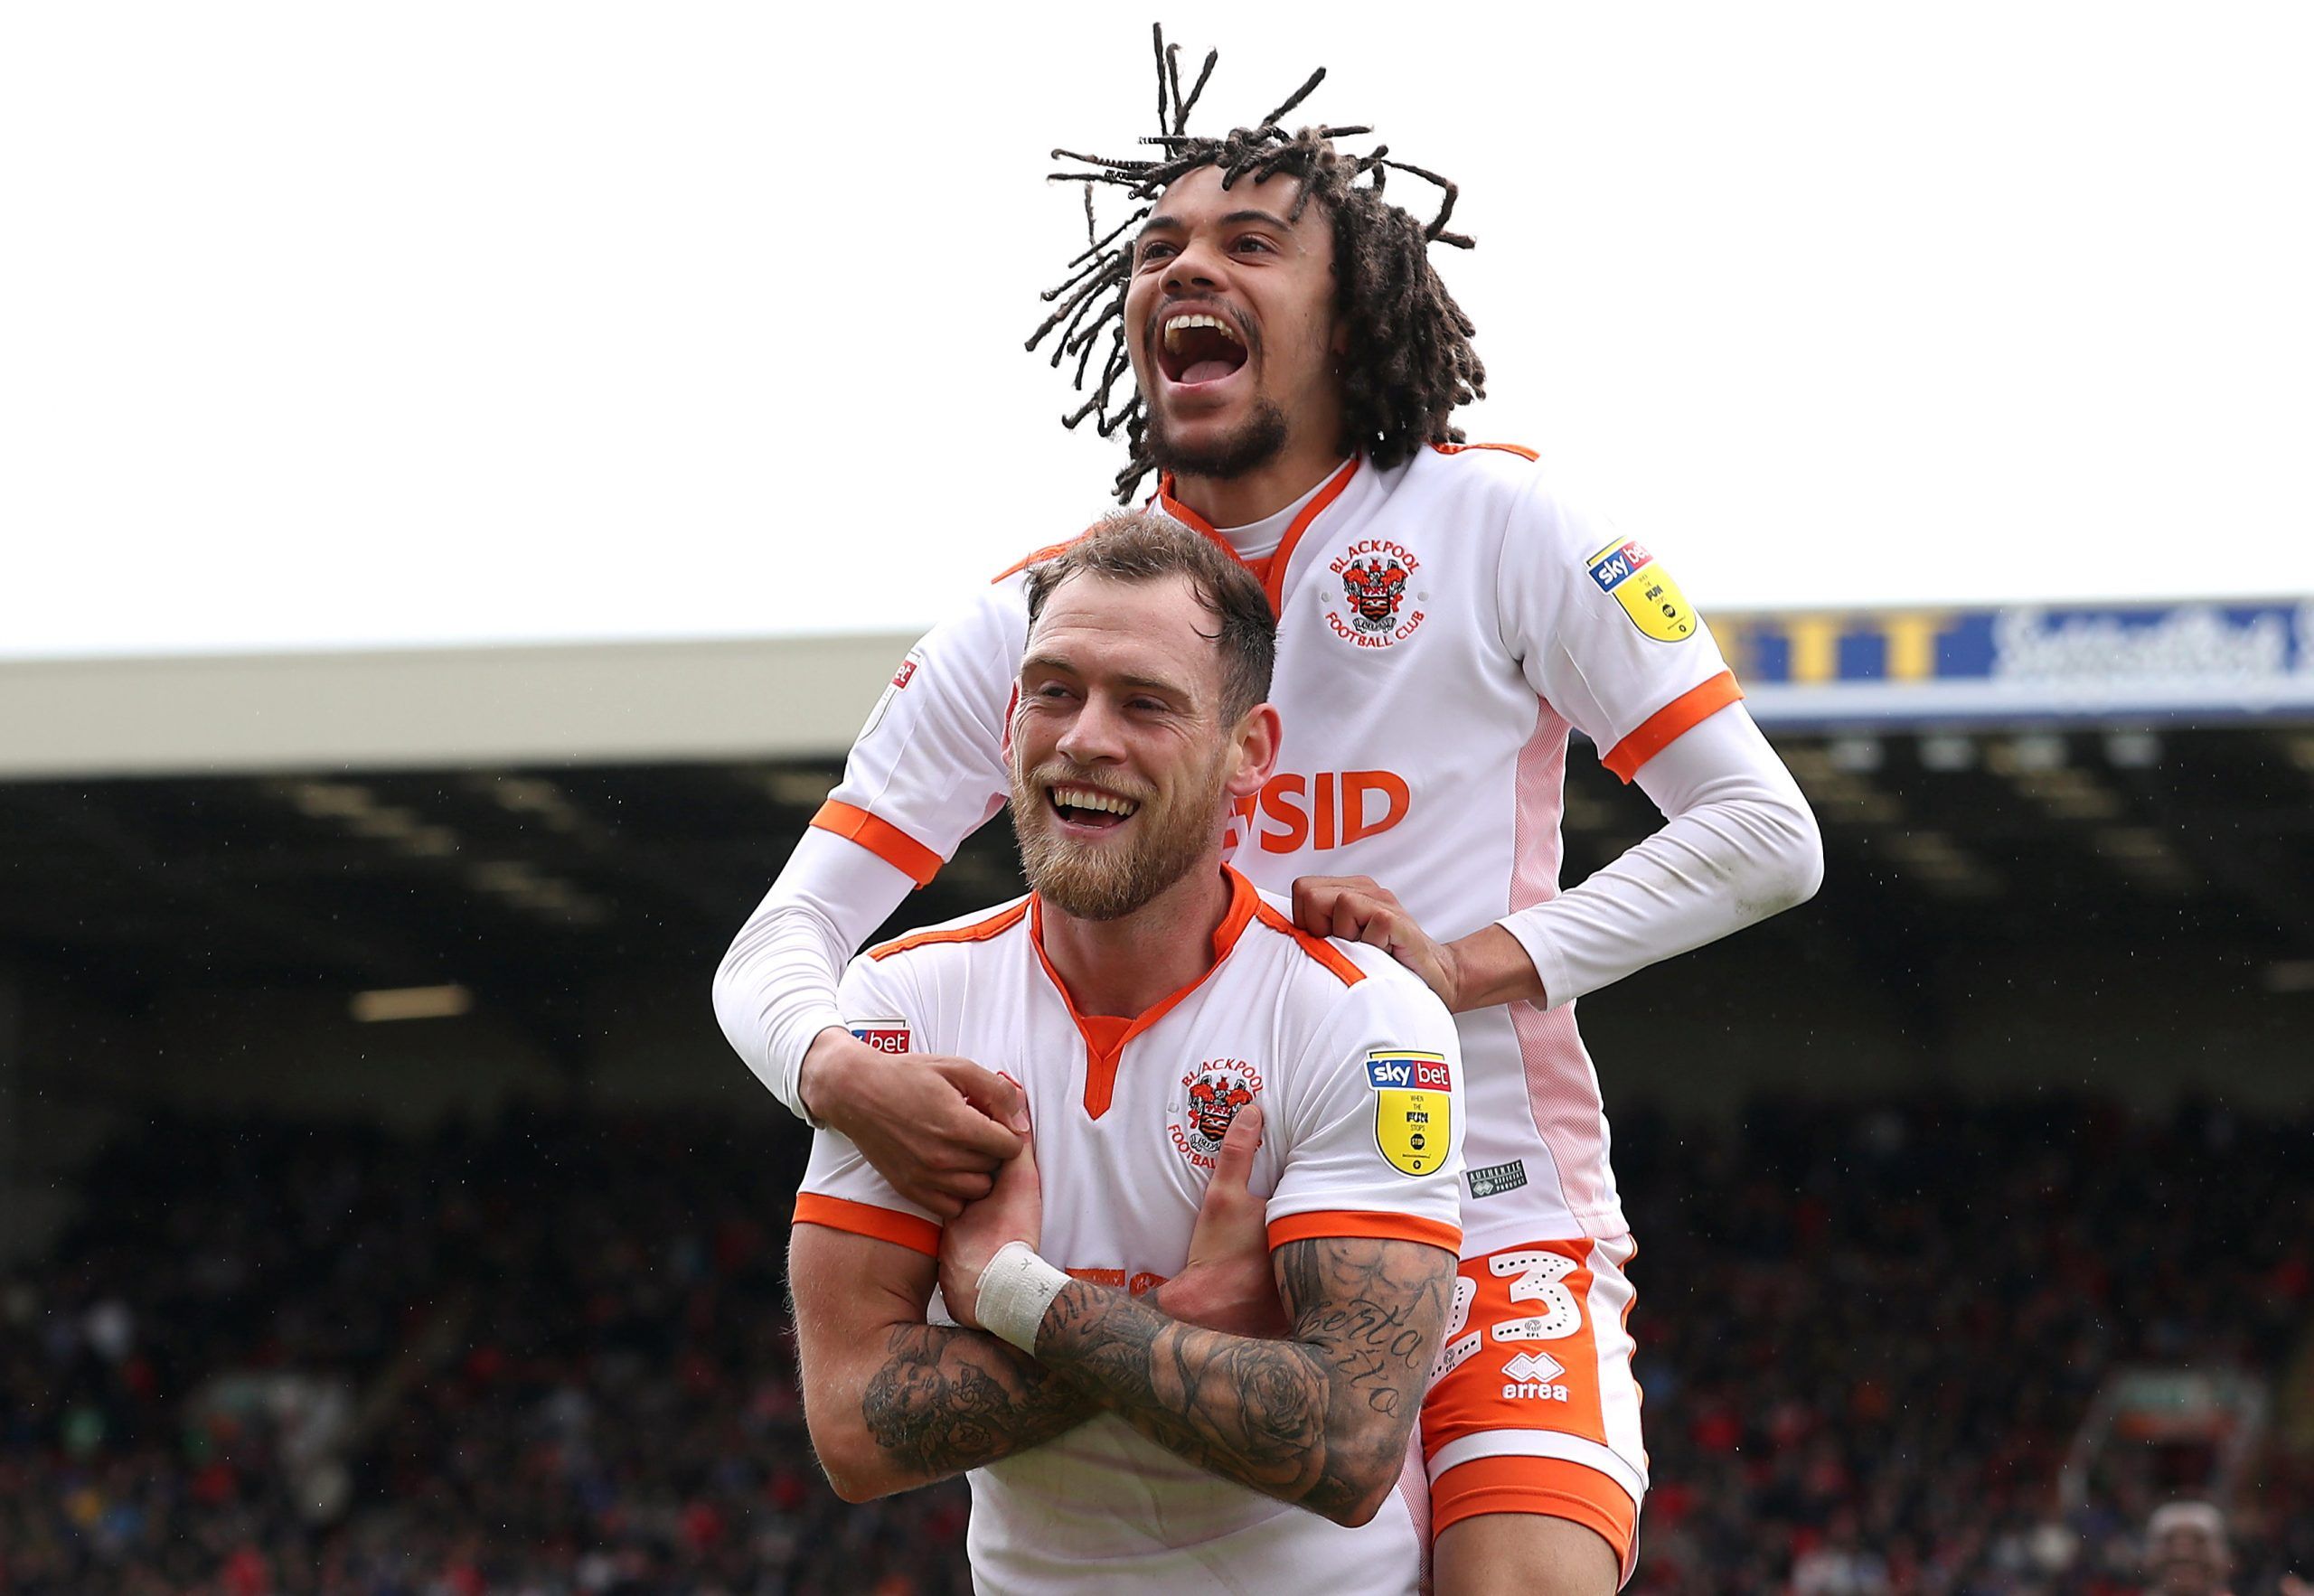 Soccer Football - League One - Barnsley v Blackpool - Oakwell, Barnsley, Britain - April 27, 2019   Blackpool's Harry Pritchard celebrates scoring their first goal with Nya Kirby   Action Images/John Clifton    EDITORIAL USE ONLY. No use with unauthorized audio, video, data, fixture lists, club/league logos or 